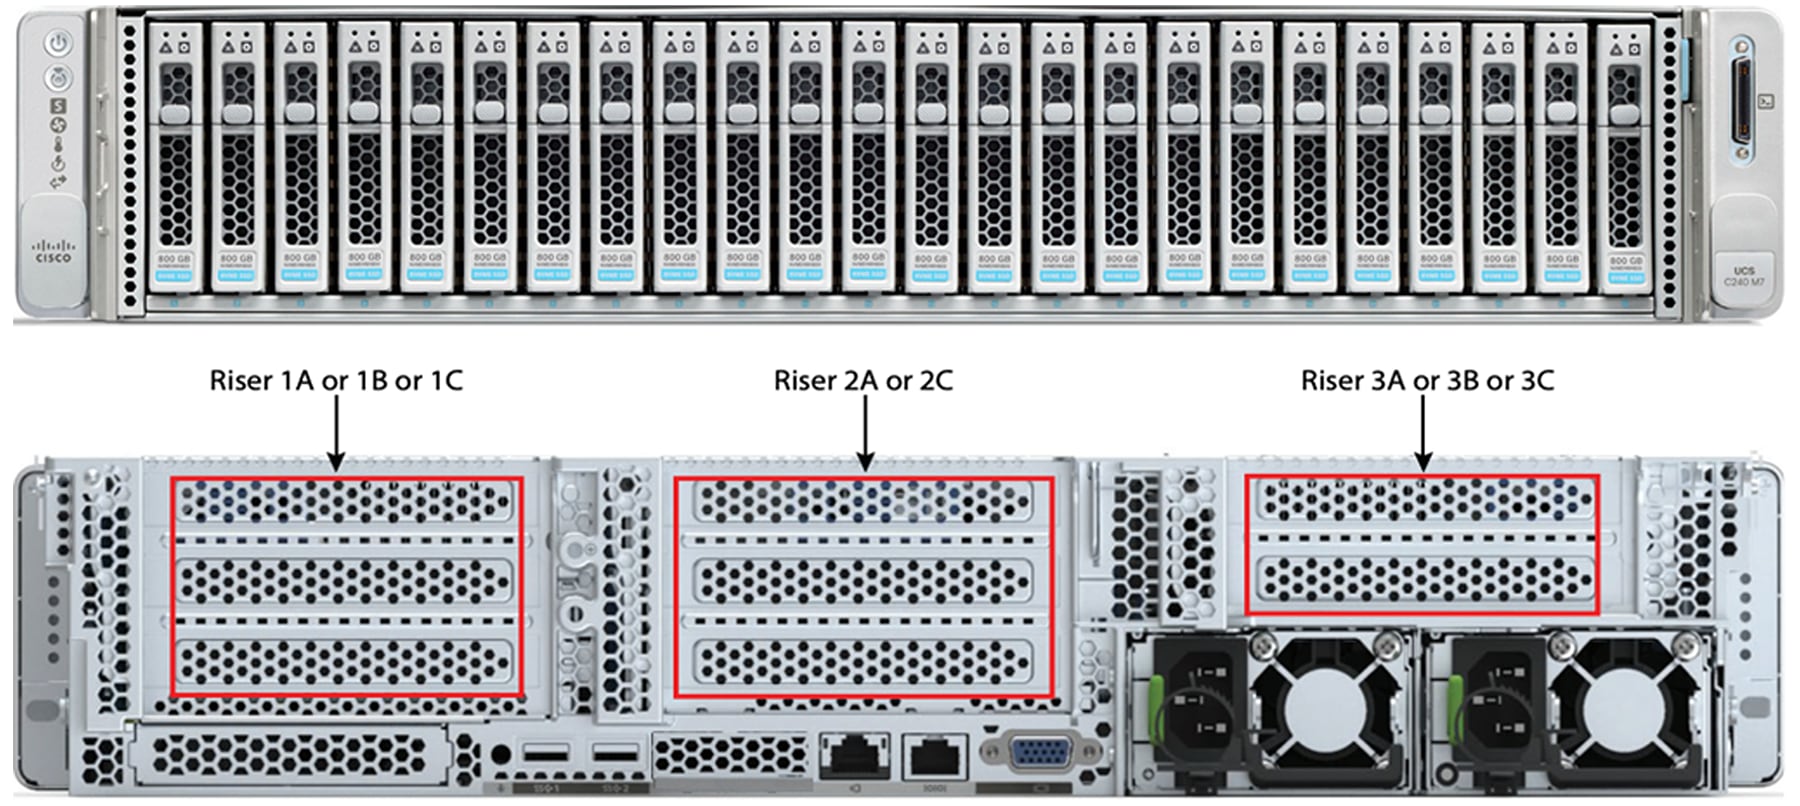 Front and rear view of Cisco UCS C240 M7 Rack Server